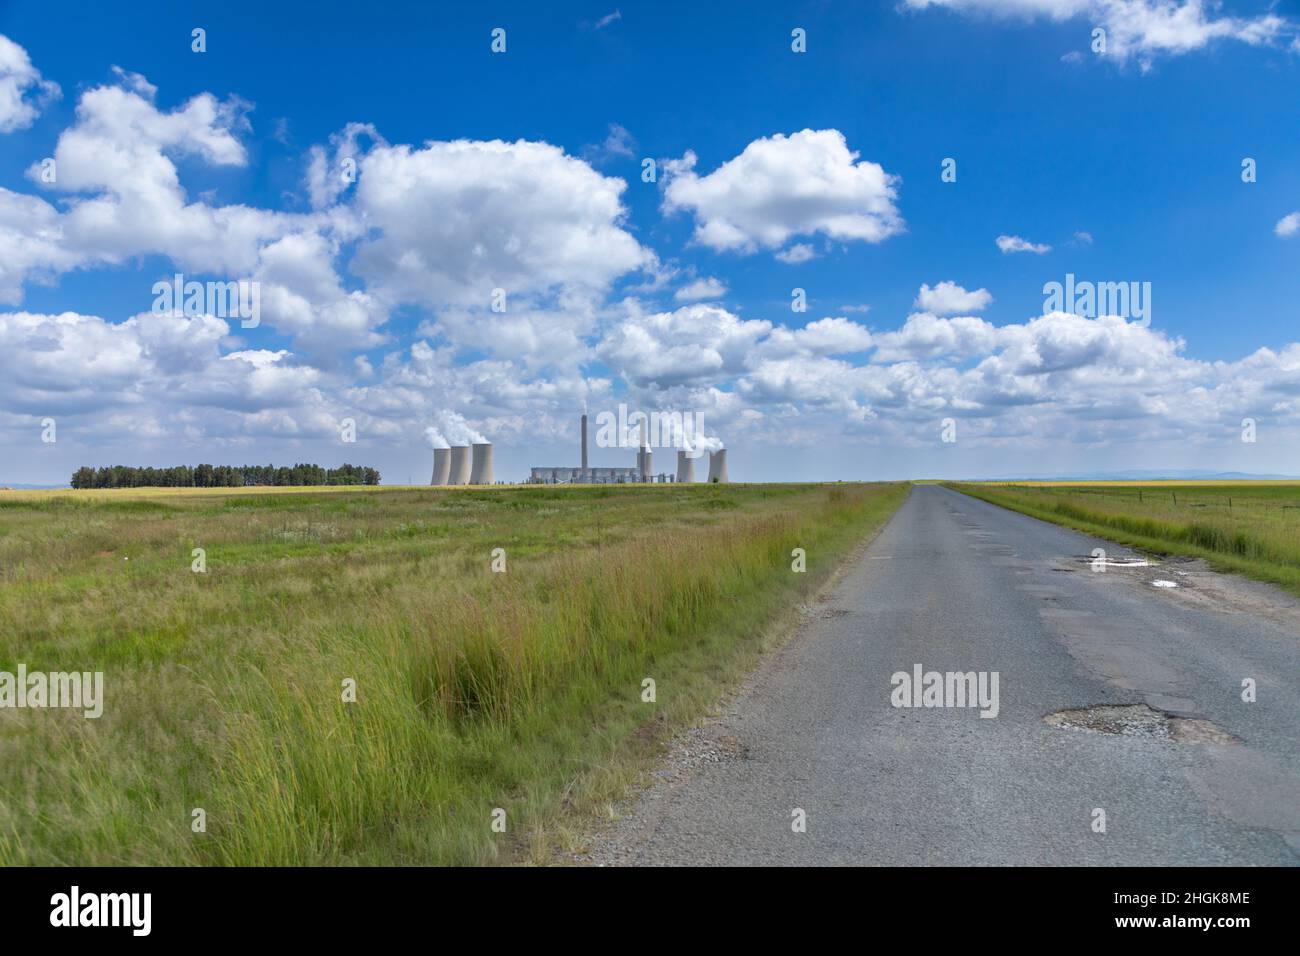 Damaged roadway with large potholes leading into the distance. In the background is a coal fired power plant. Stock Photo